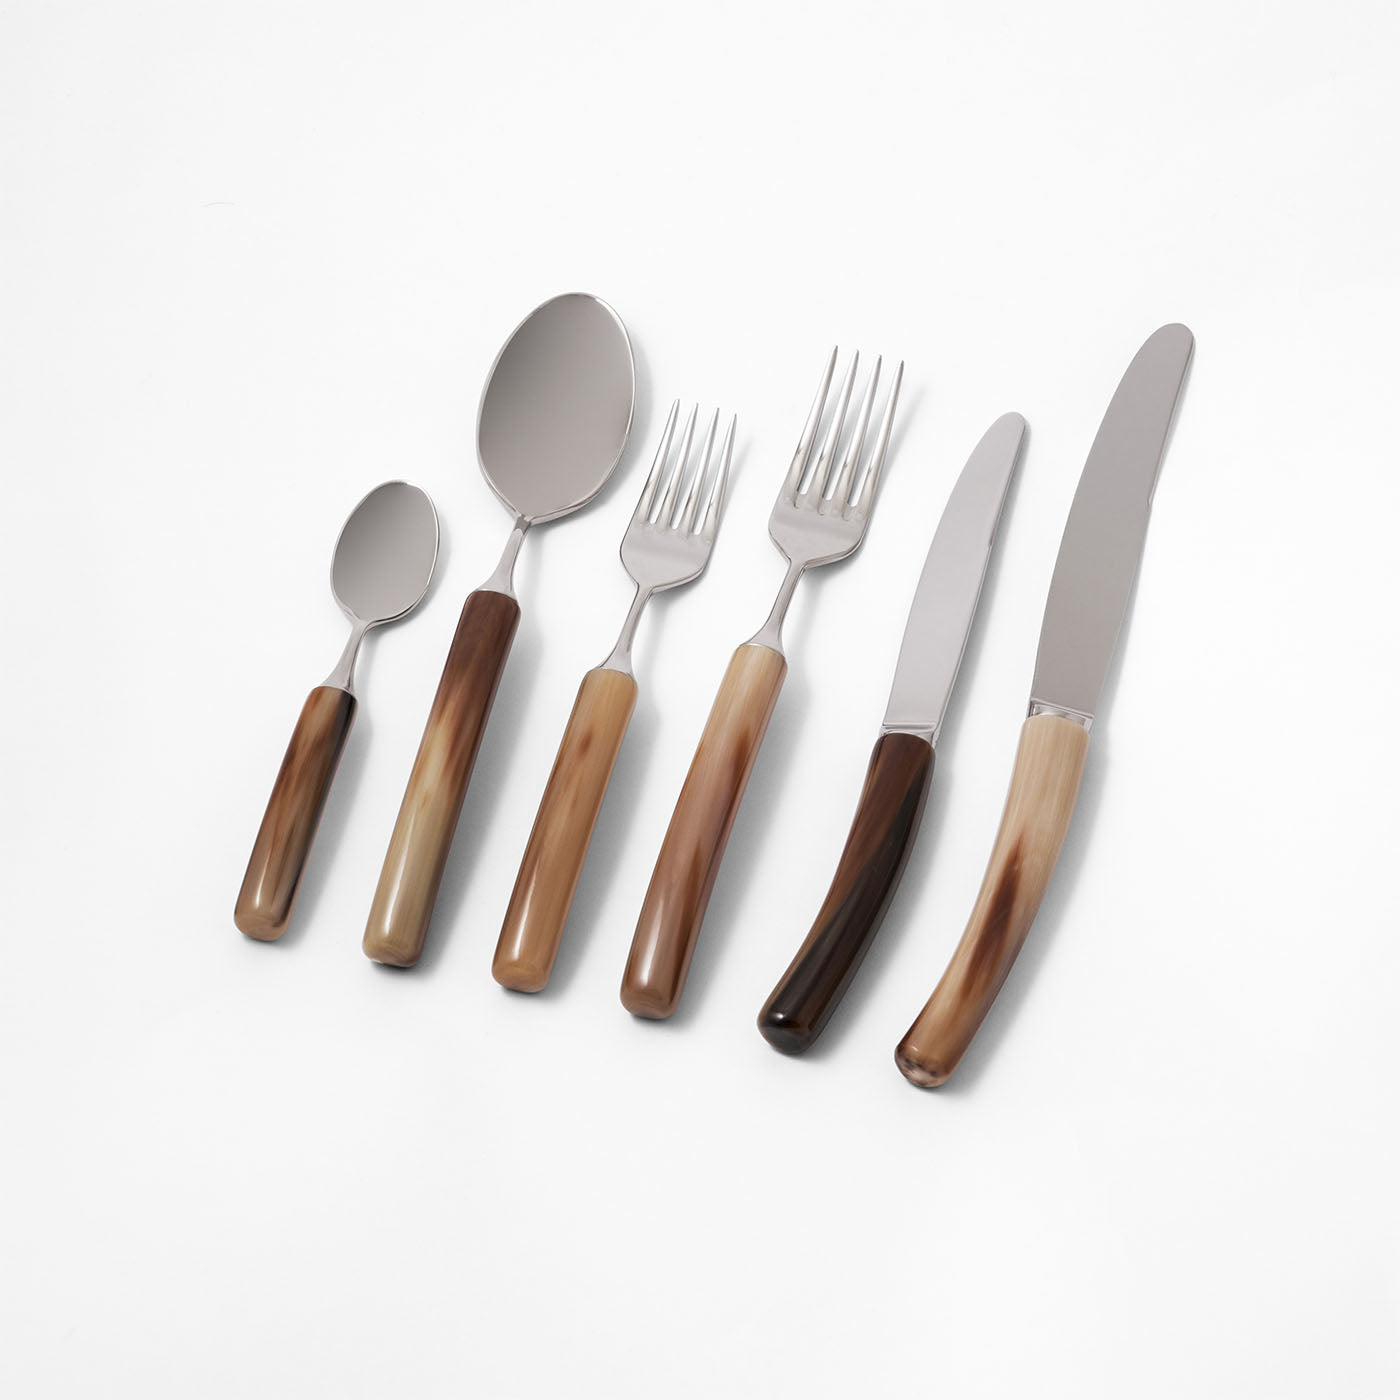 Classic Table Cutlery Set - Alternative view 1